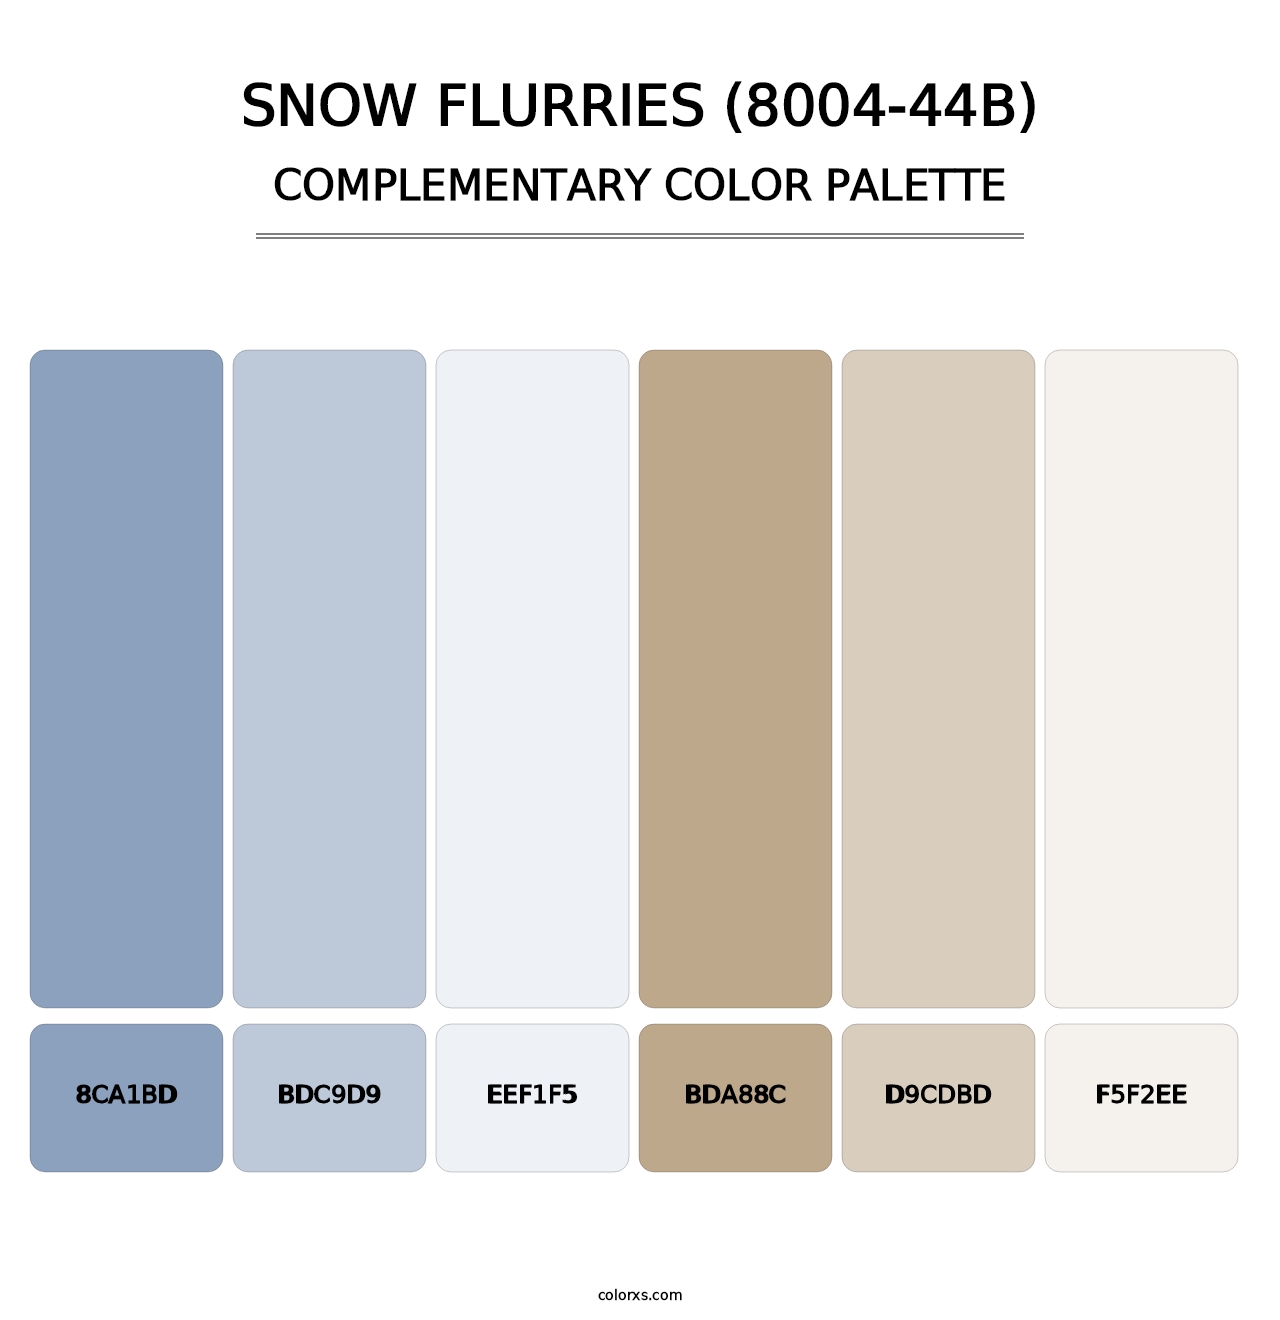 Snow Flurries (8004-44B) - Complementary Color Palette